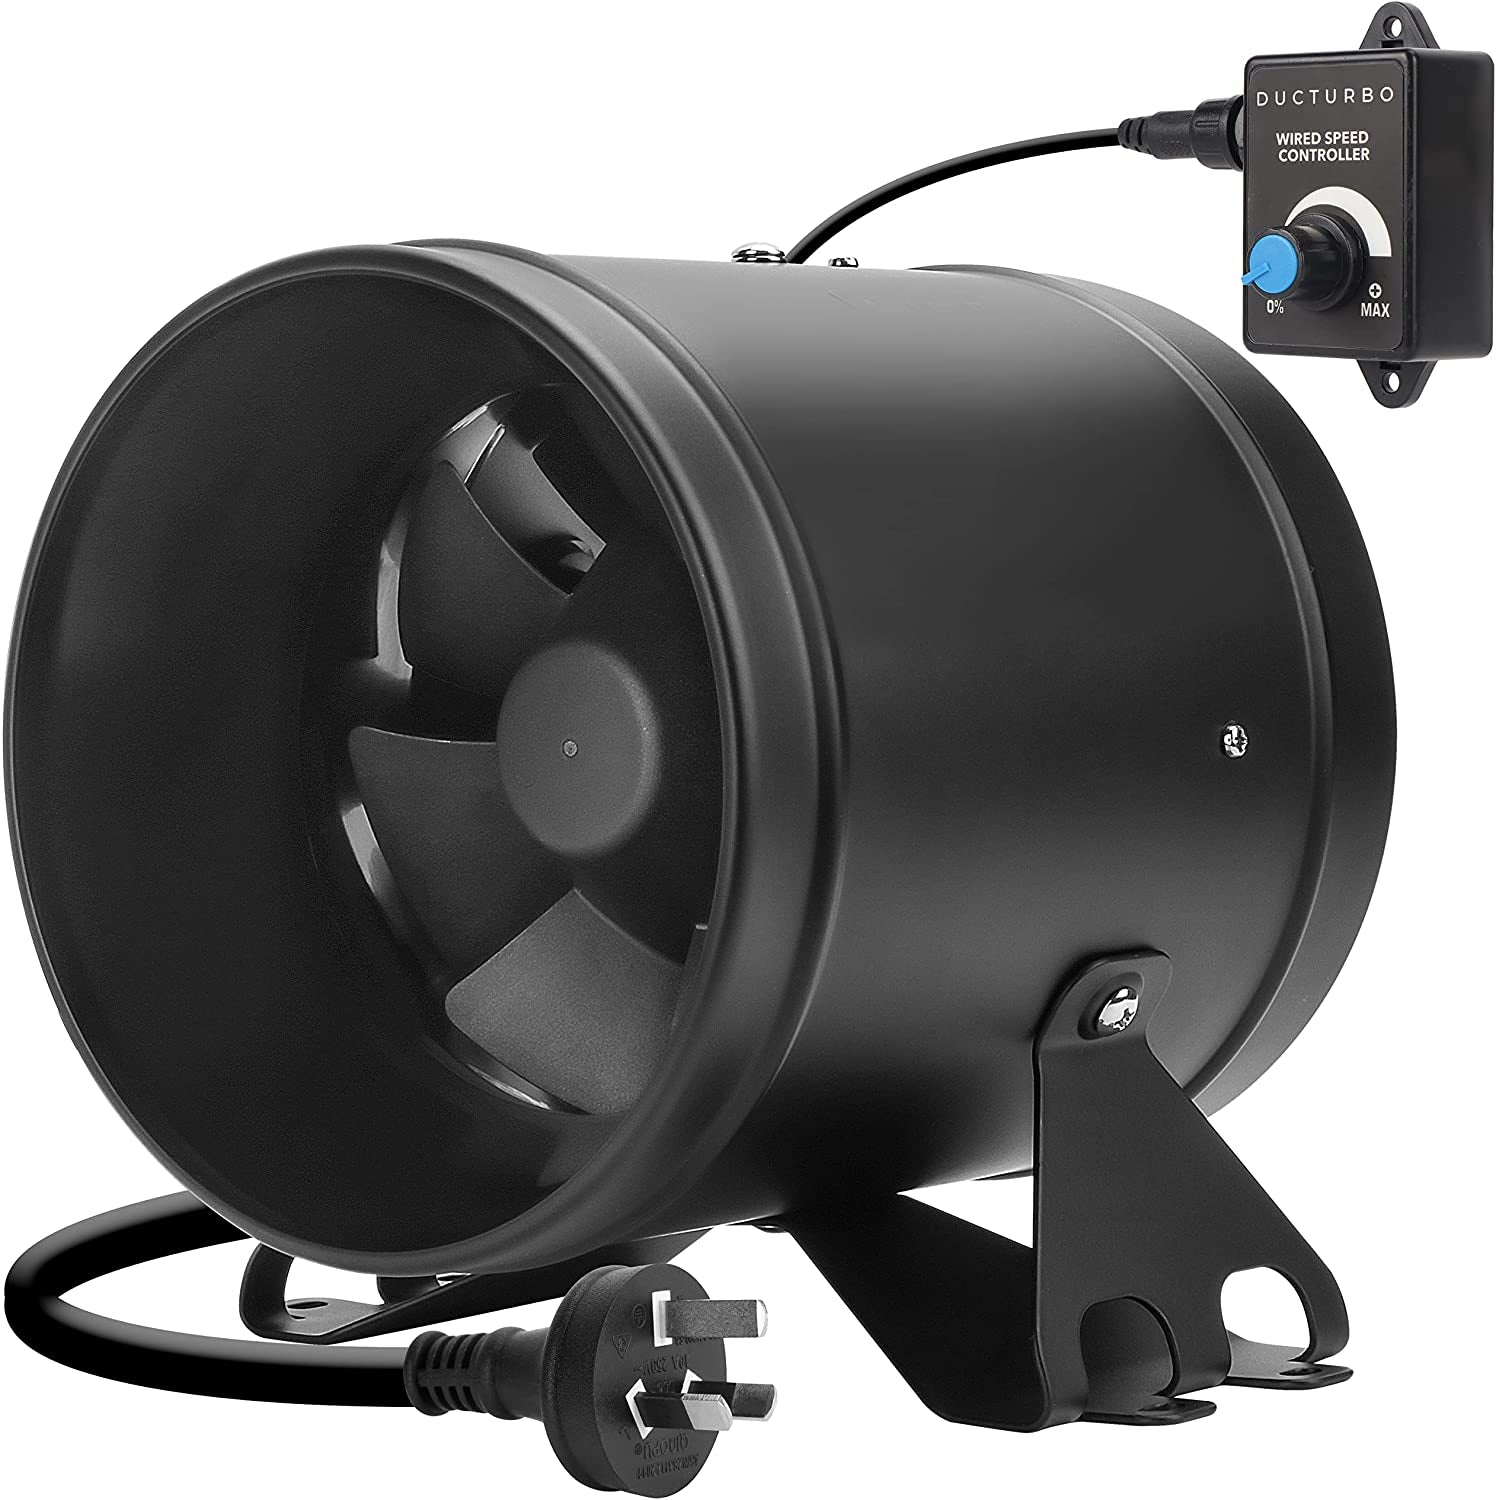 DUCTURBO, DUCTURBO 6 Inch Inline Duct Fans, 350 CFM Ventilation Exhaust Fan Ideal for Indoor Heating Cooling Transfer or Grow Tents Air Boosting, with Variable Speed Controller